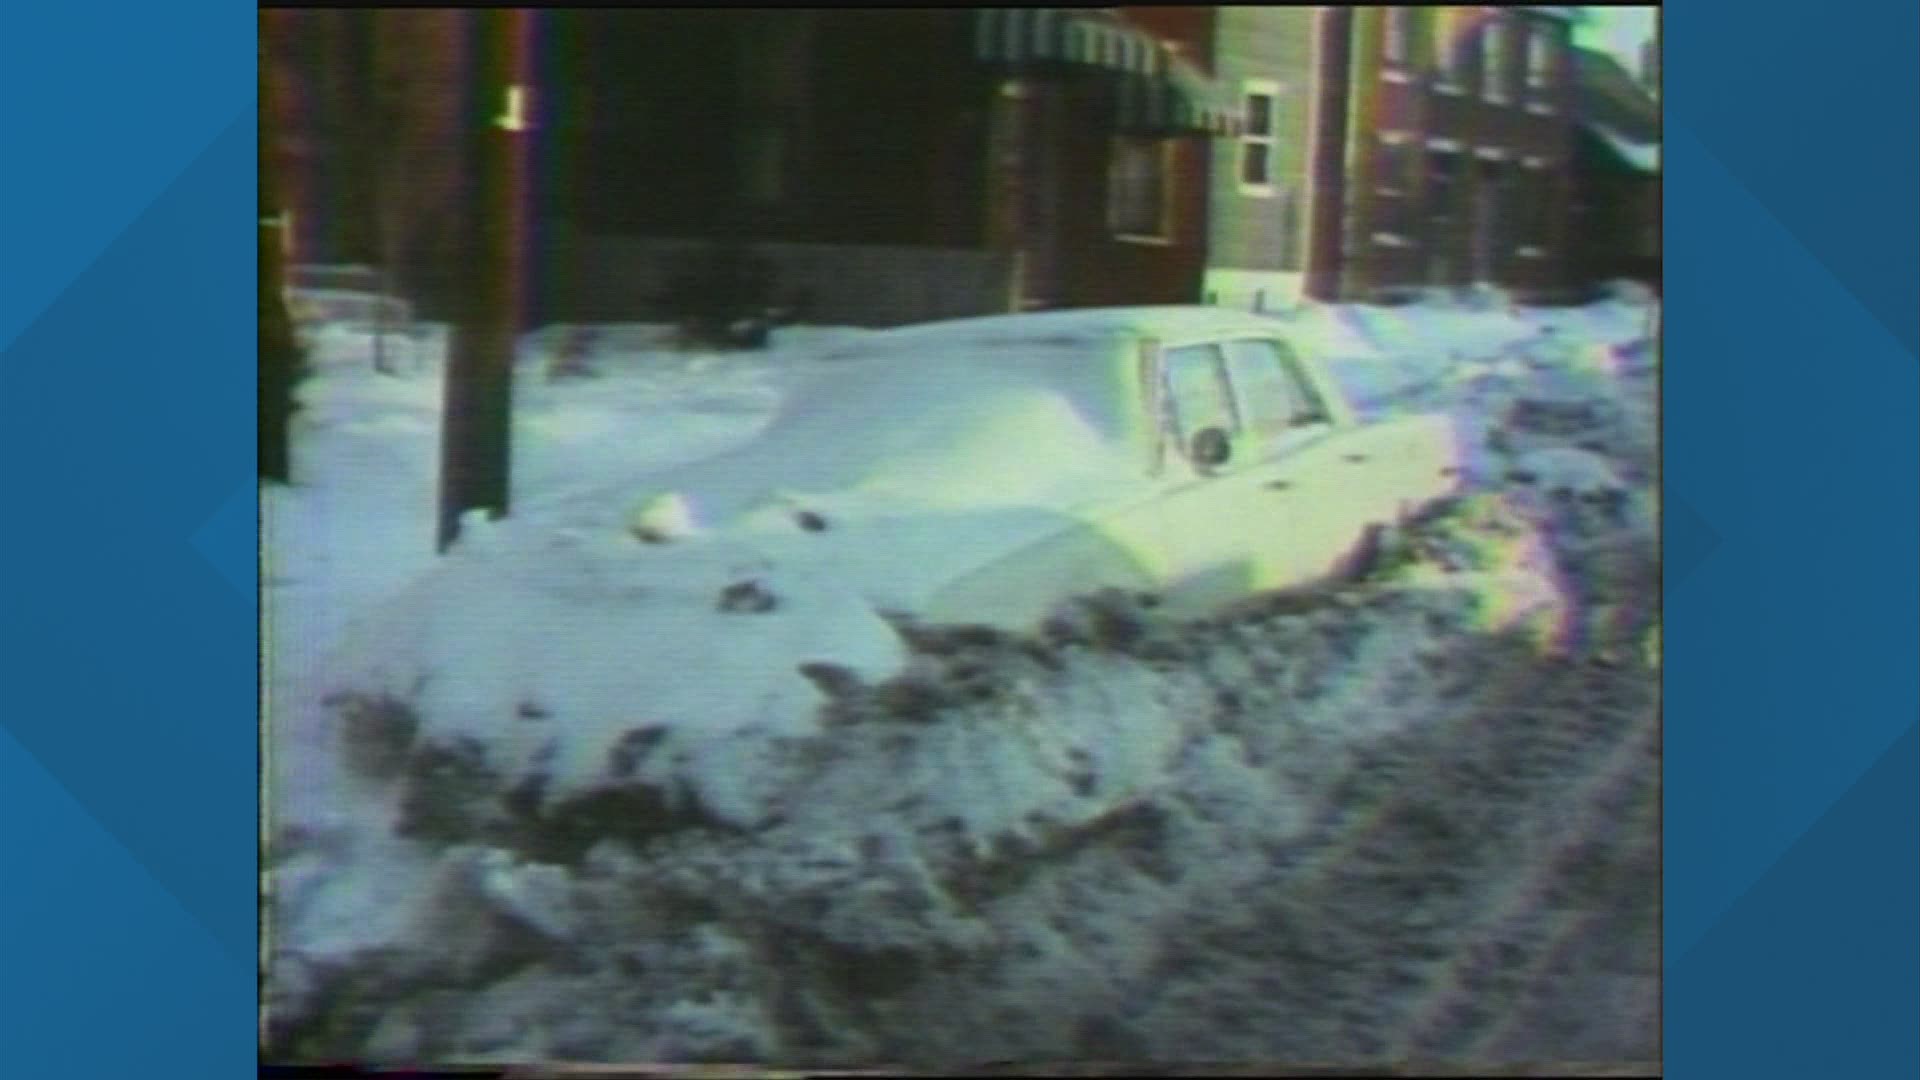 The Ohio Department of Transportation said the ability to communicate, prepare and forecast has improved greatly since the blizzard of 1978.